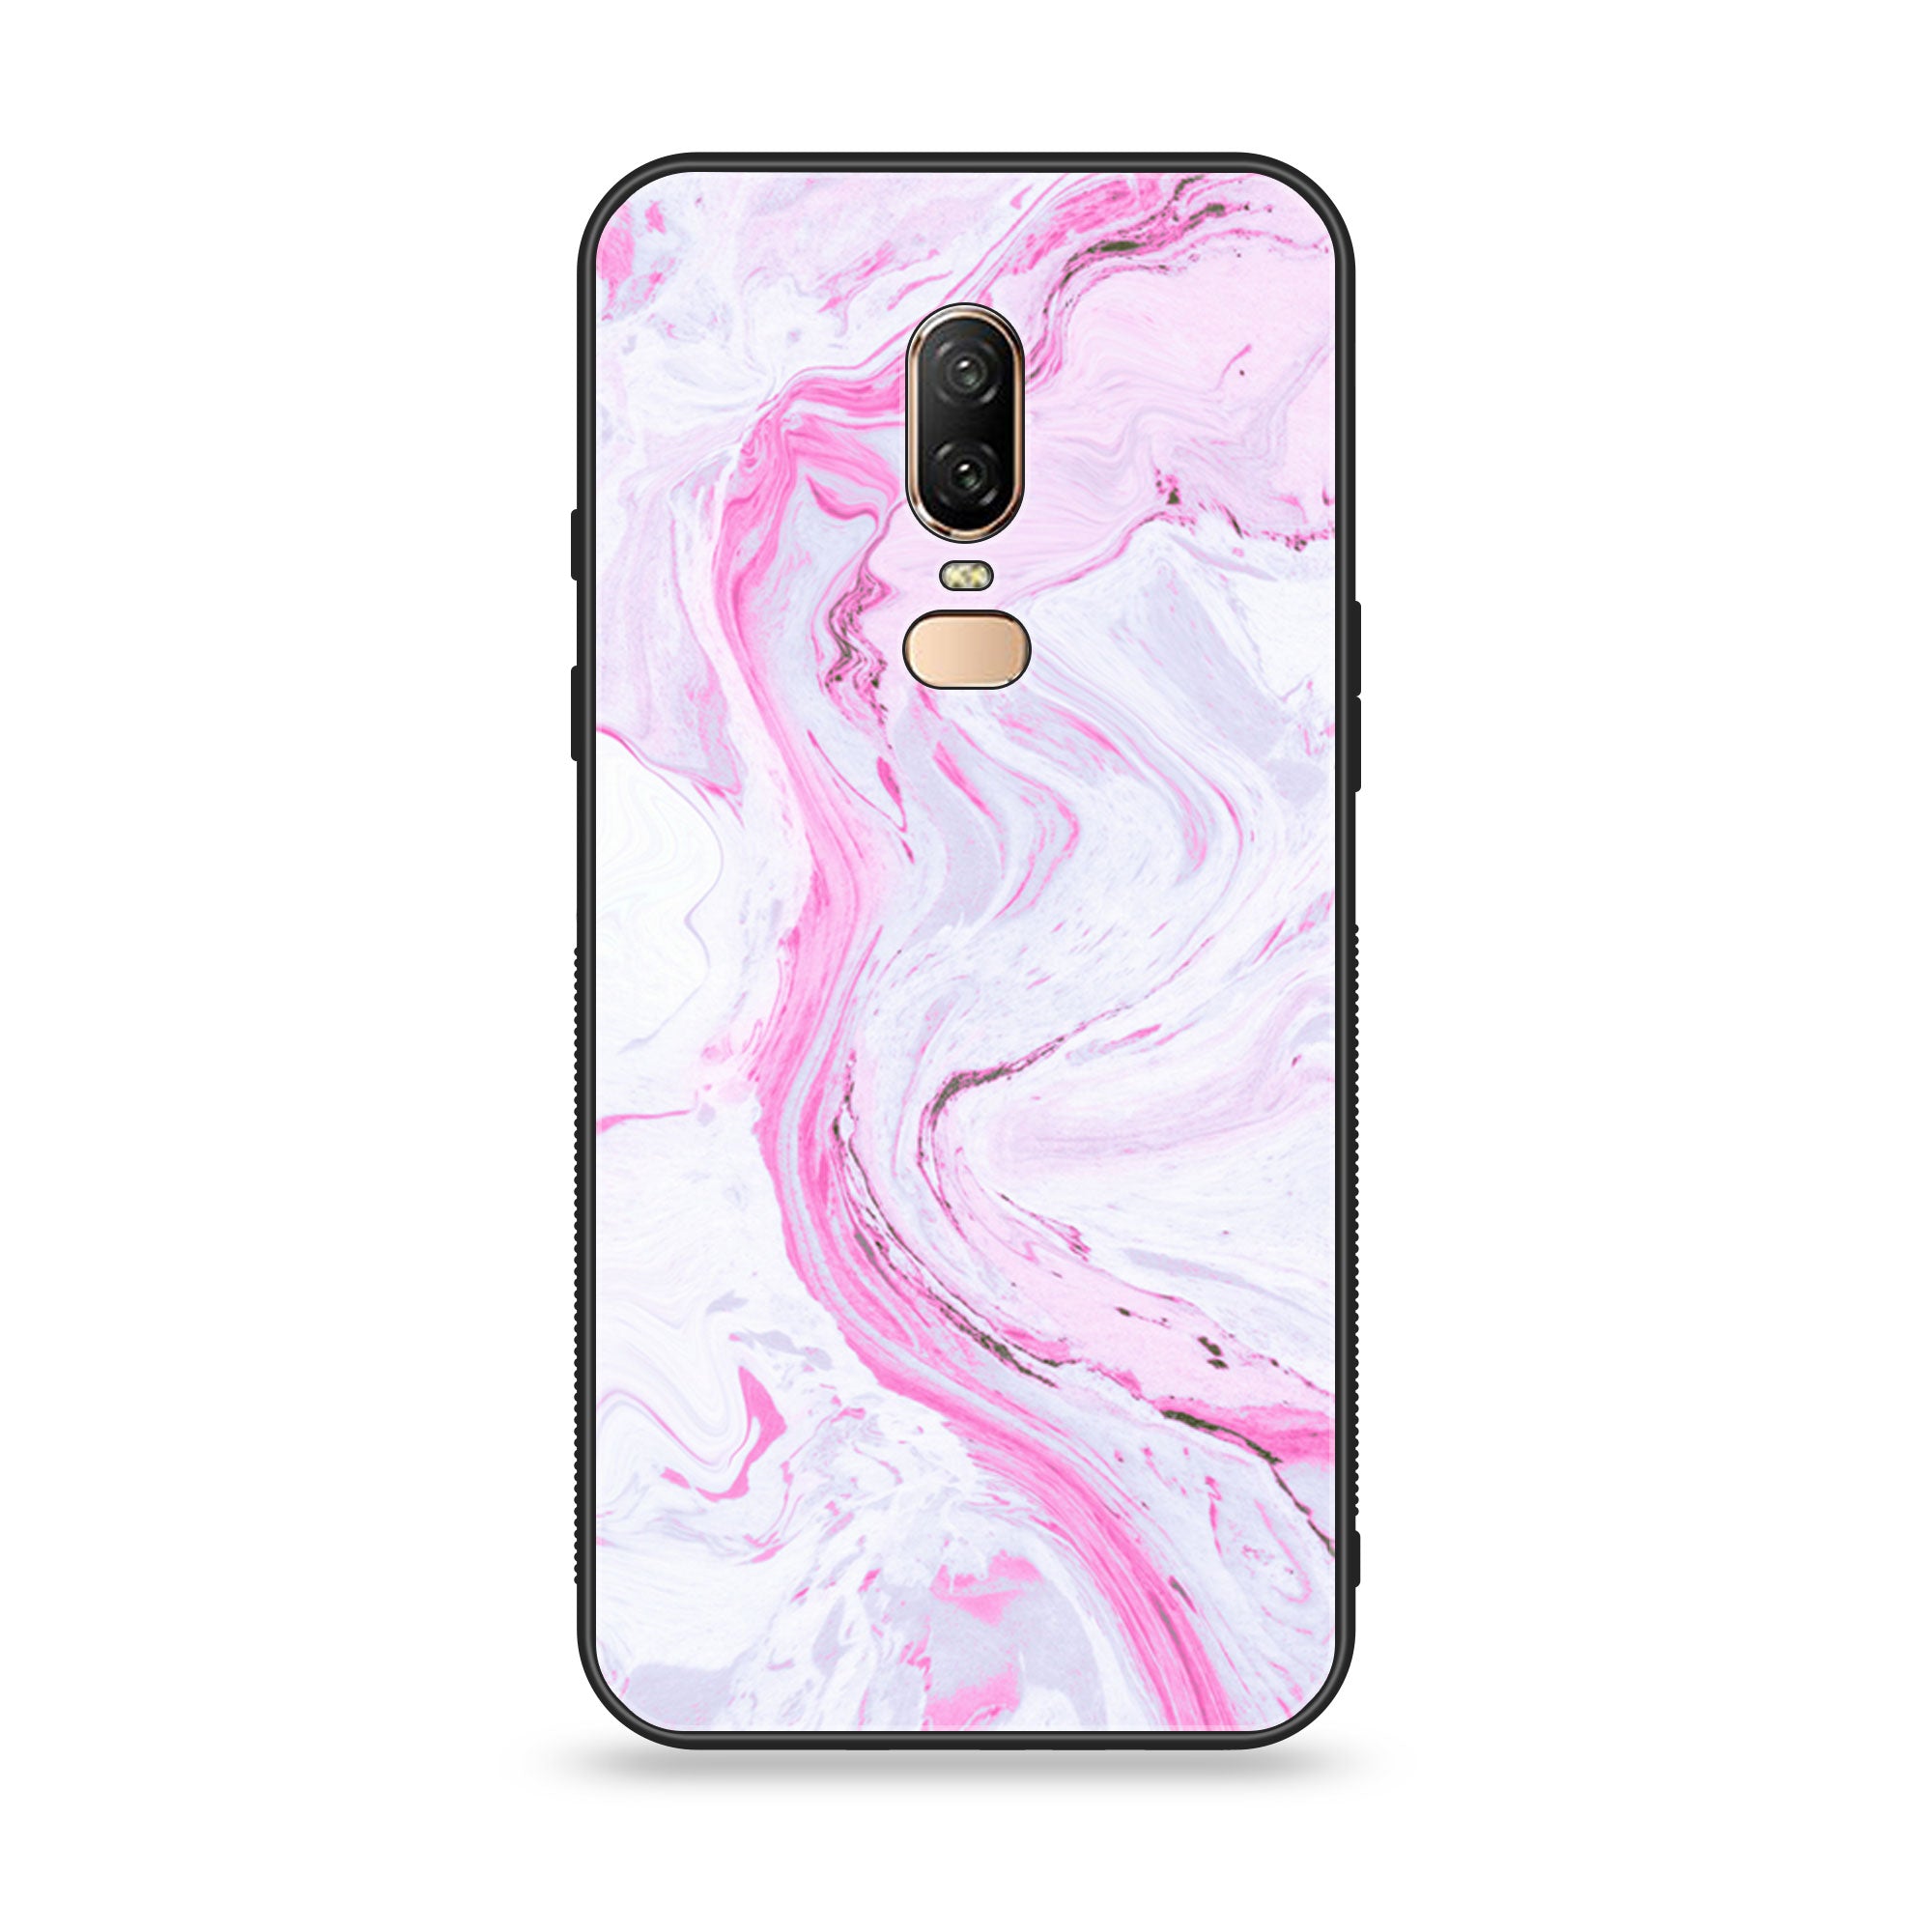 OnePlus 6 - Pink Marble Series - Premium Printed Glass soft Bumper shock Proof Case